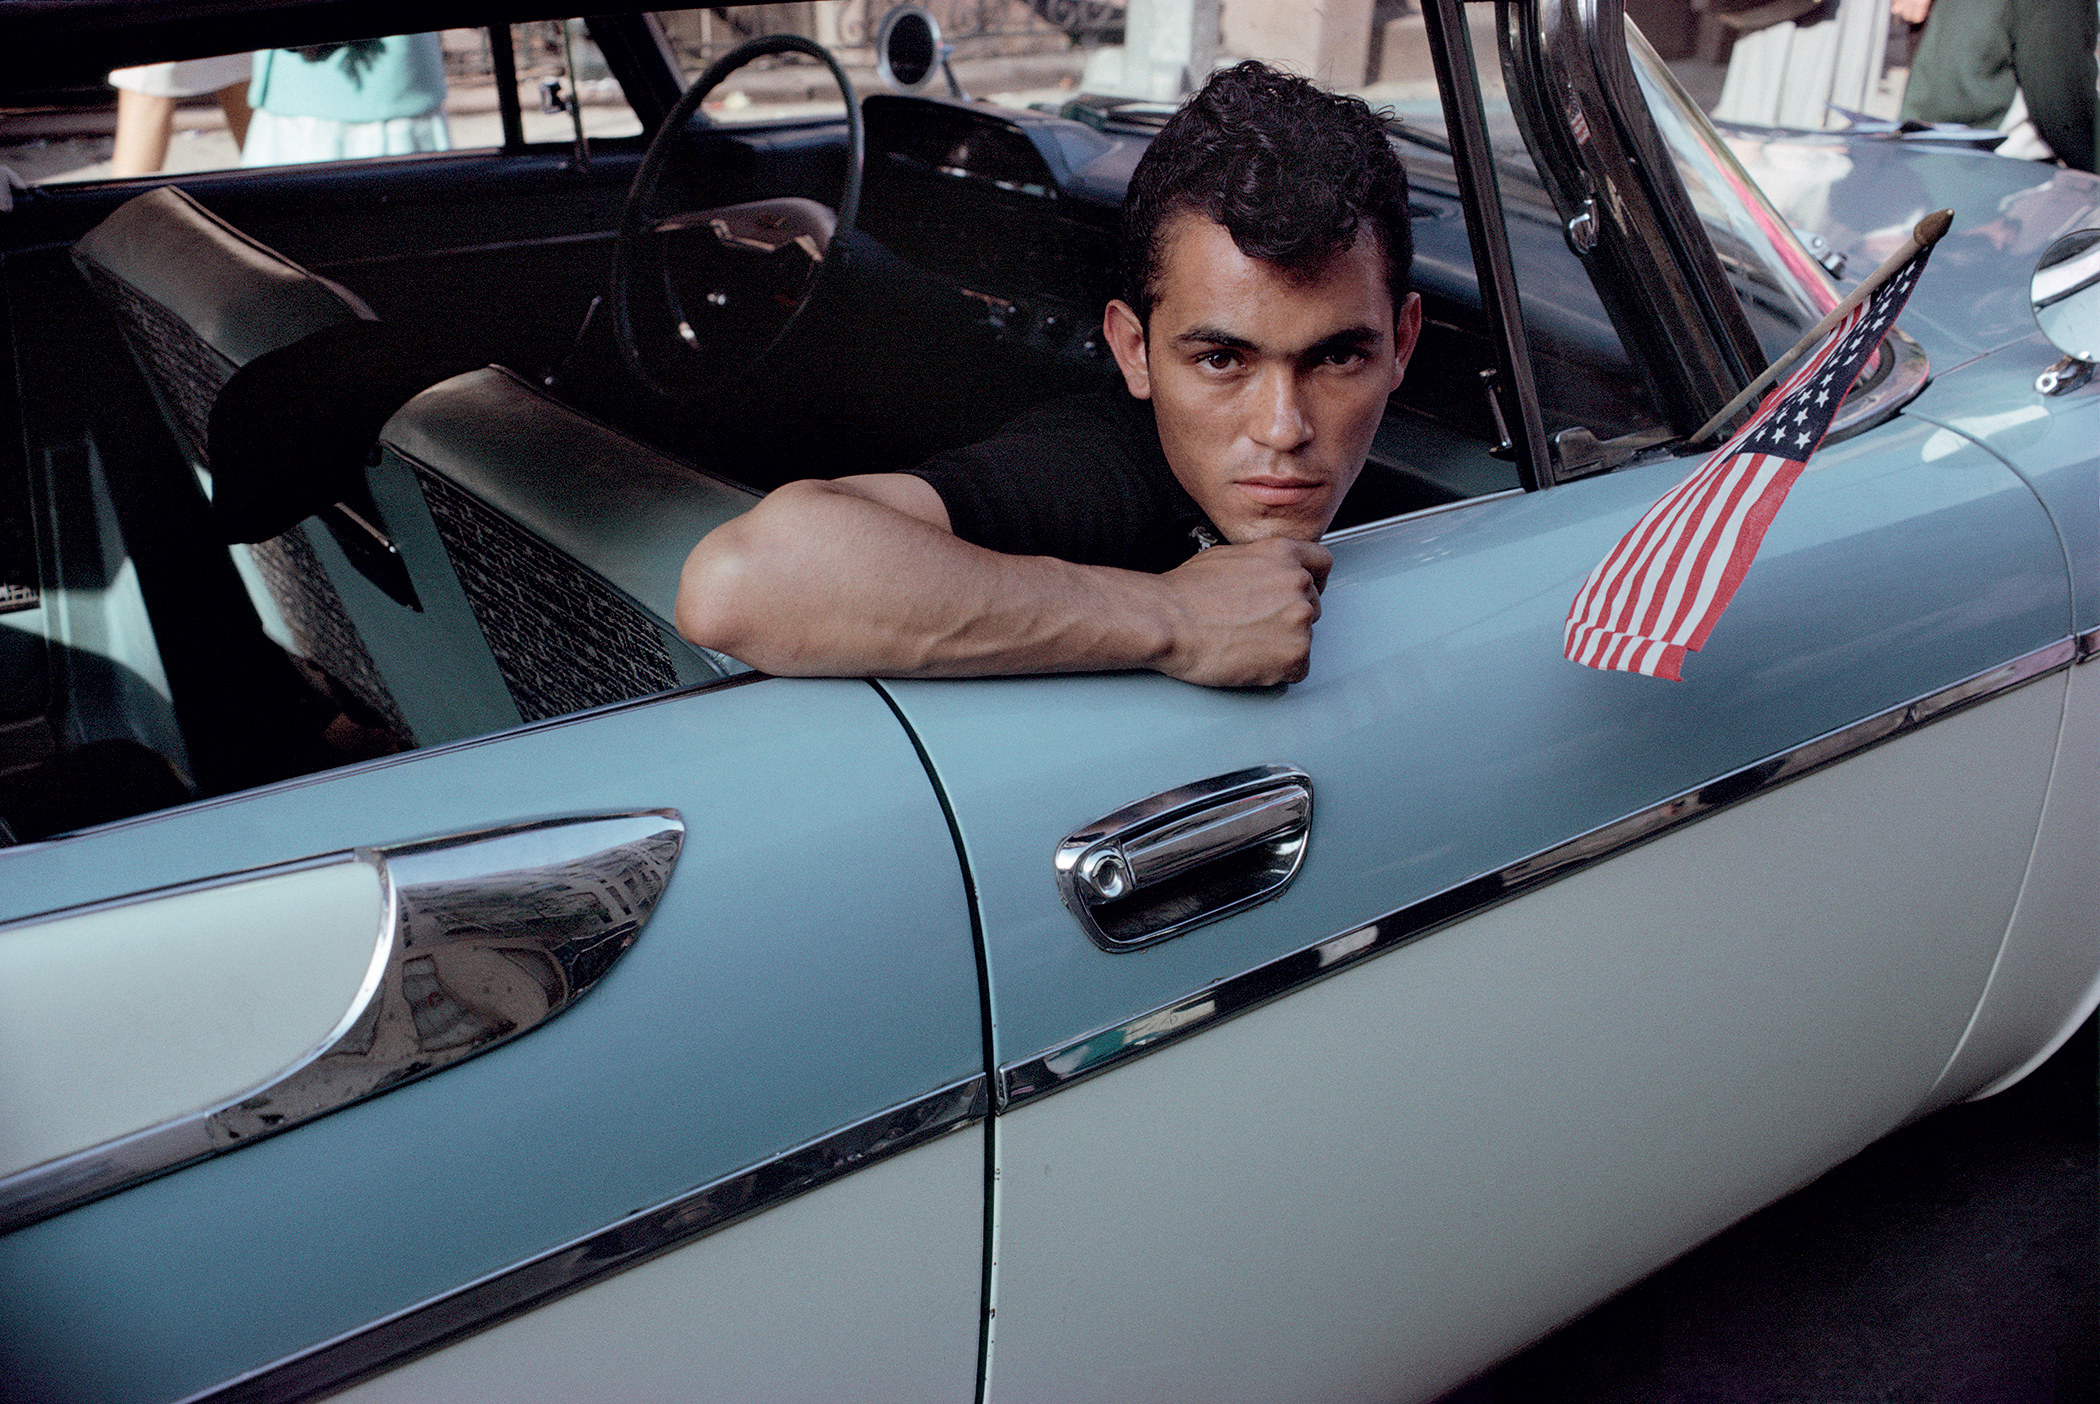 A young man rests in the passenger seat of a classic car